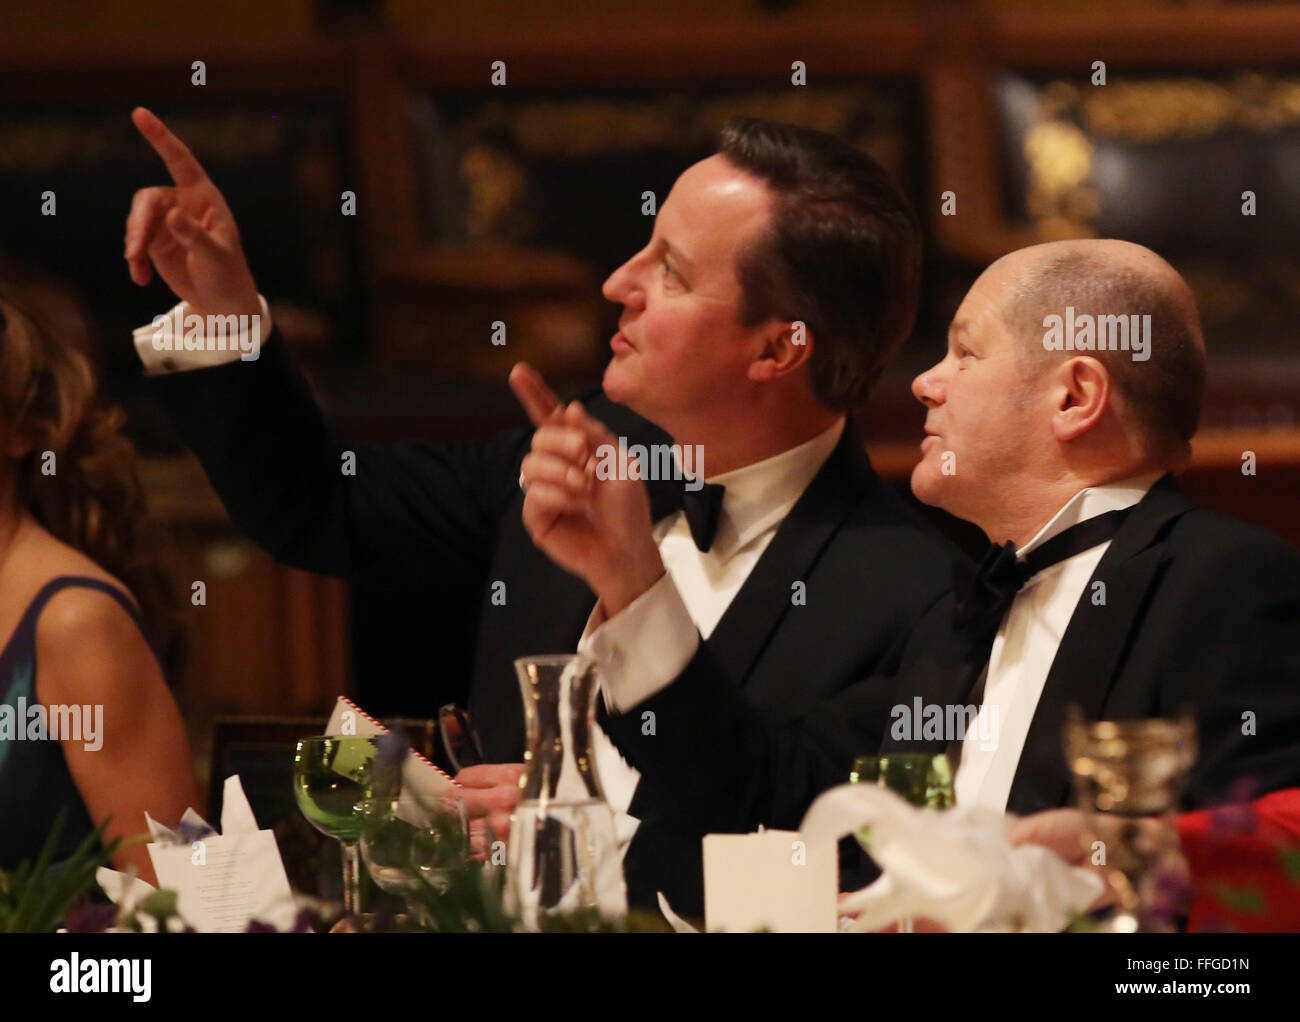 Hamburg, Germany. 12th Feb, 2016. Hamburg's First Mayor Olaf Scholz (R-L) and Britain's Prime Minister David Cameron talk at the annual Matthiae dinner at the city hall of Hamburg, Germany, 12 February 2016. Britain's Prime Minister David Cameron and German Chancellor Angela Merkel are guests of honour at the oldest feast in the world. Since 1356, the leaders of the Hansa city invite distinguished guests to the Matthiae dinner. Photo: CHRISTIAN CHARISIUS/dpa/Alamy Live News Stock Photo